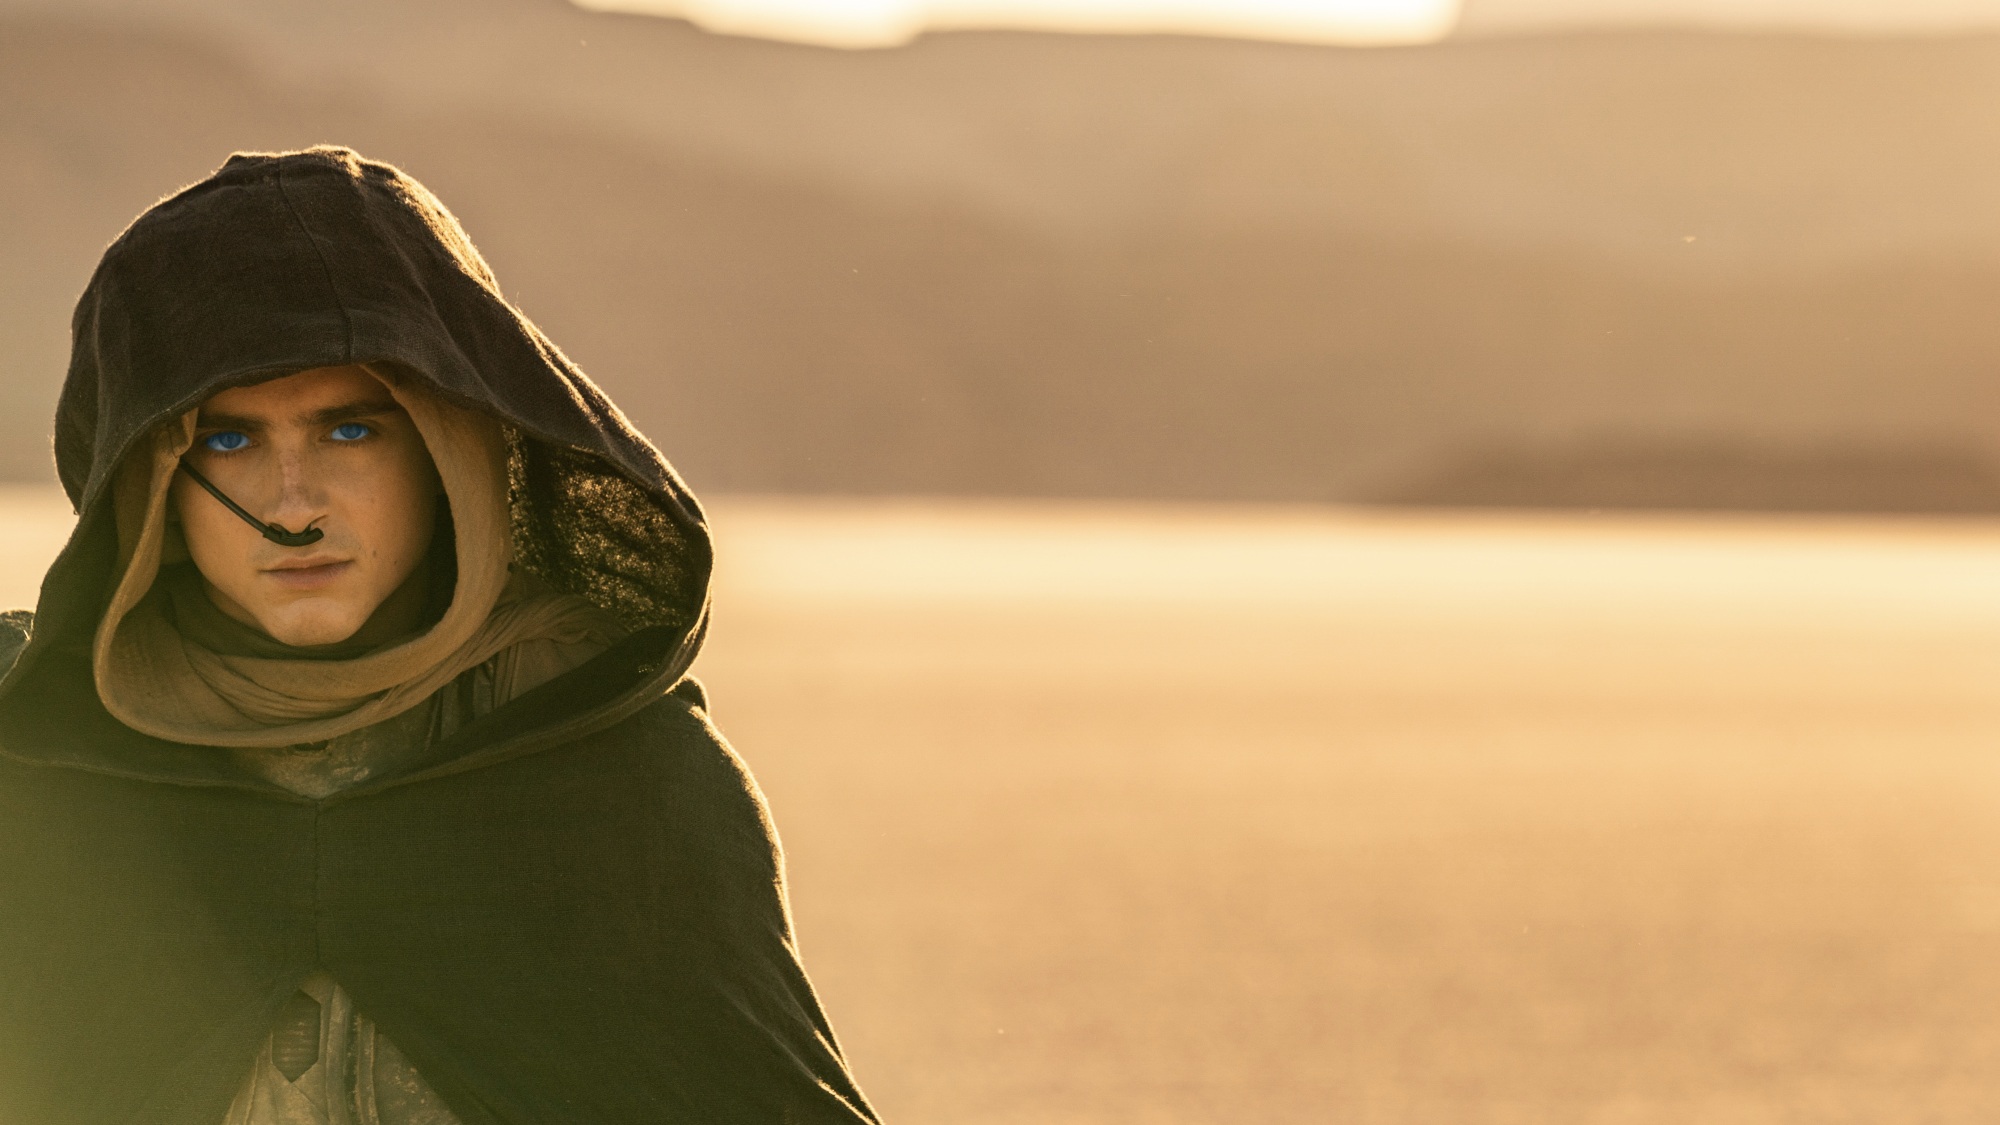 A young man with glowing blue eyes walks through the desert while wearing a brown hooded cloak.